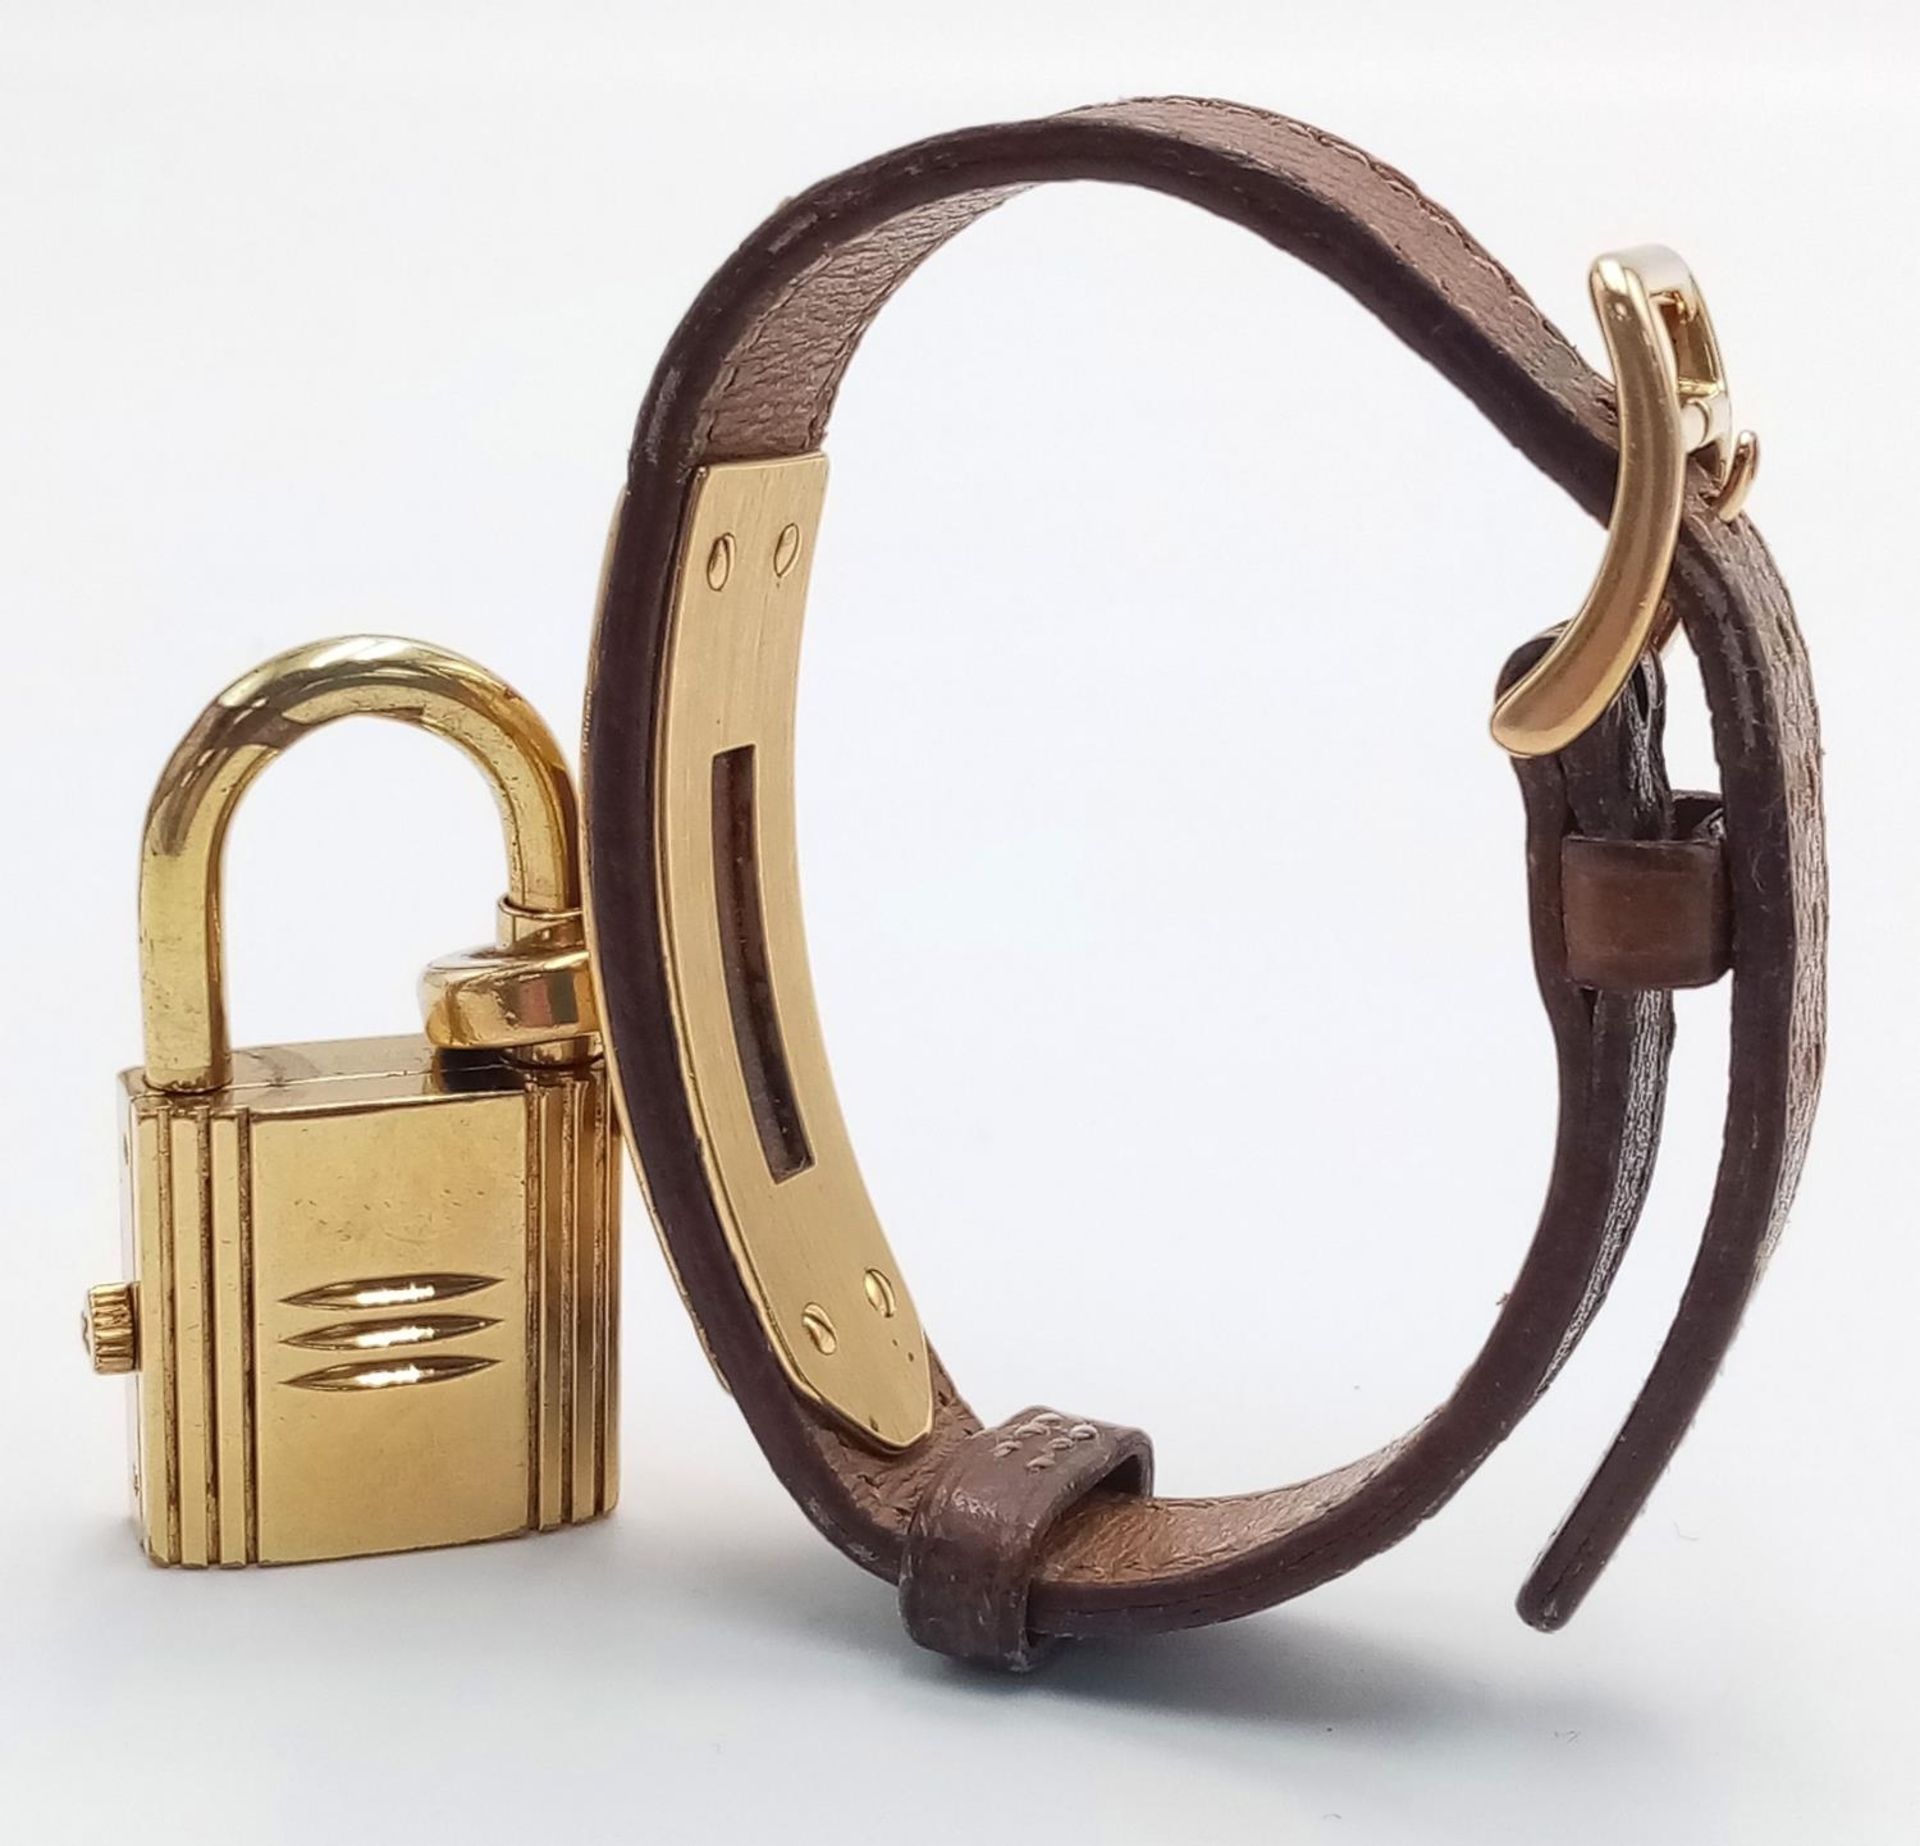 A Hermes Kelly Watch. Brown leather strap. Gold plated padlock quartz watch. Needs a battery so as - Image 2 of 7